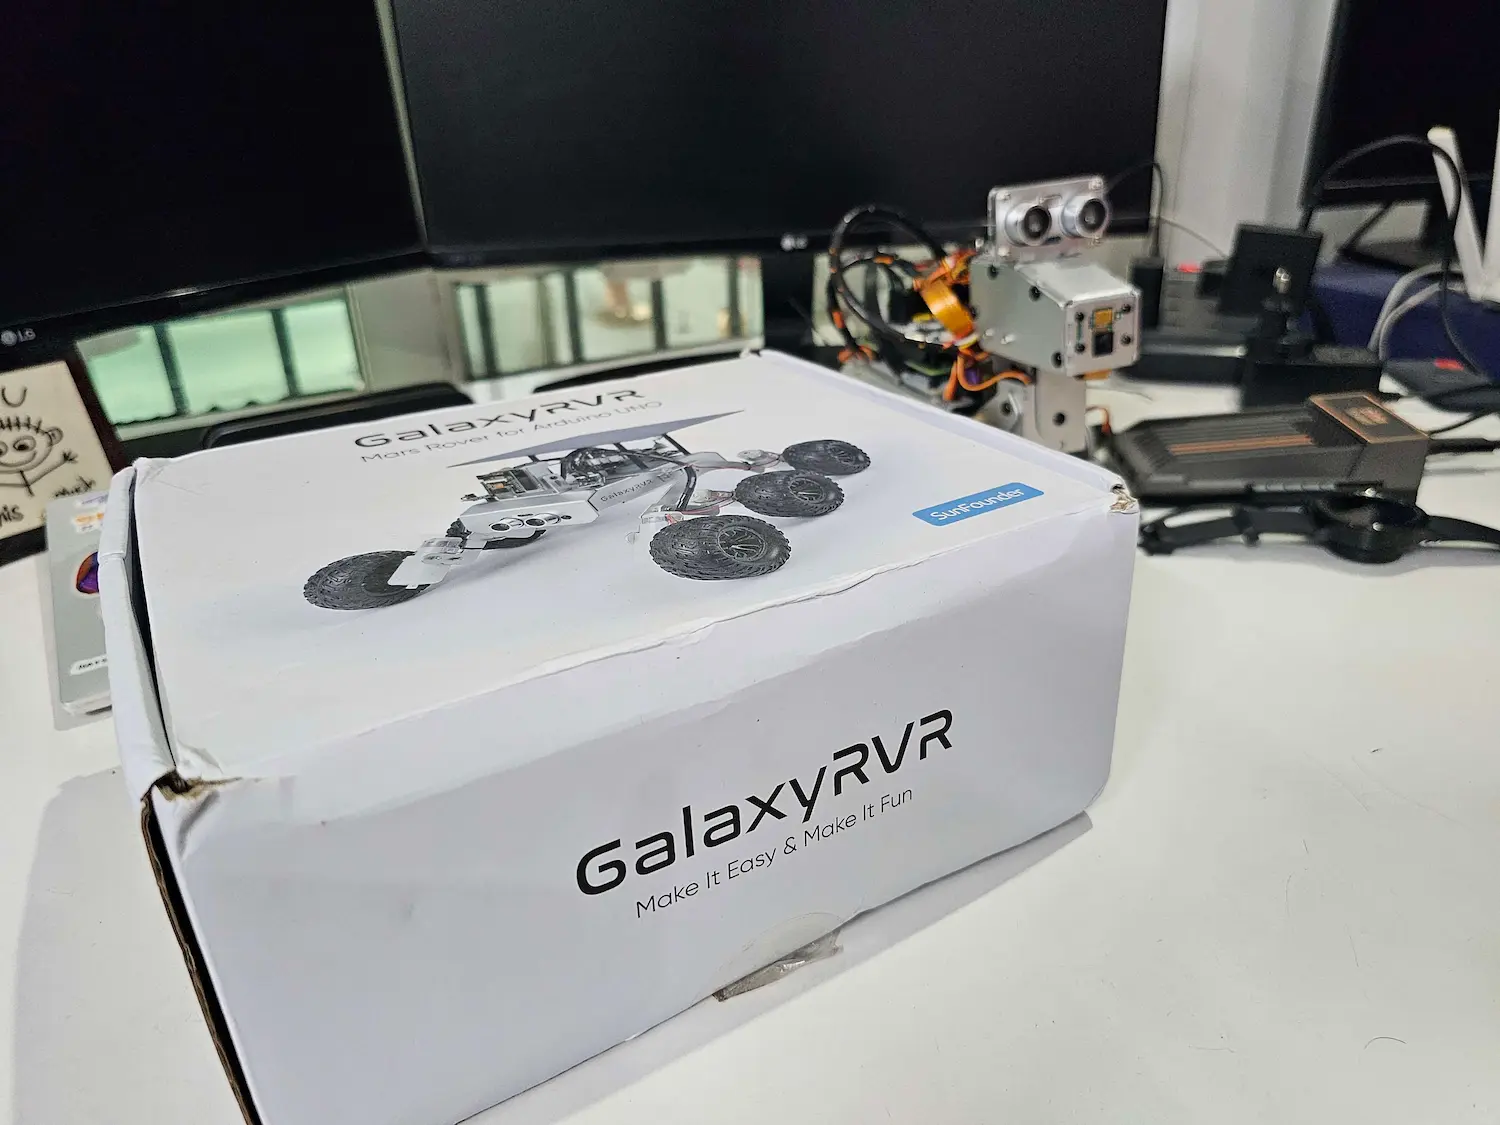 Unboxing SunFounder's GalaxyRVR Arduino assembly kit